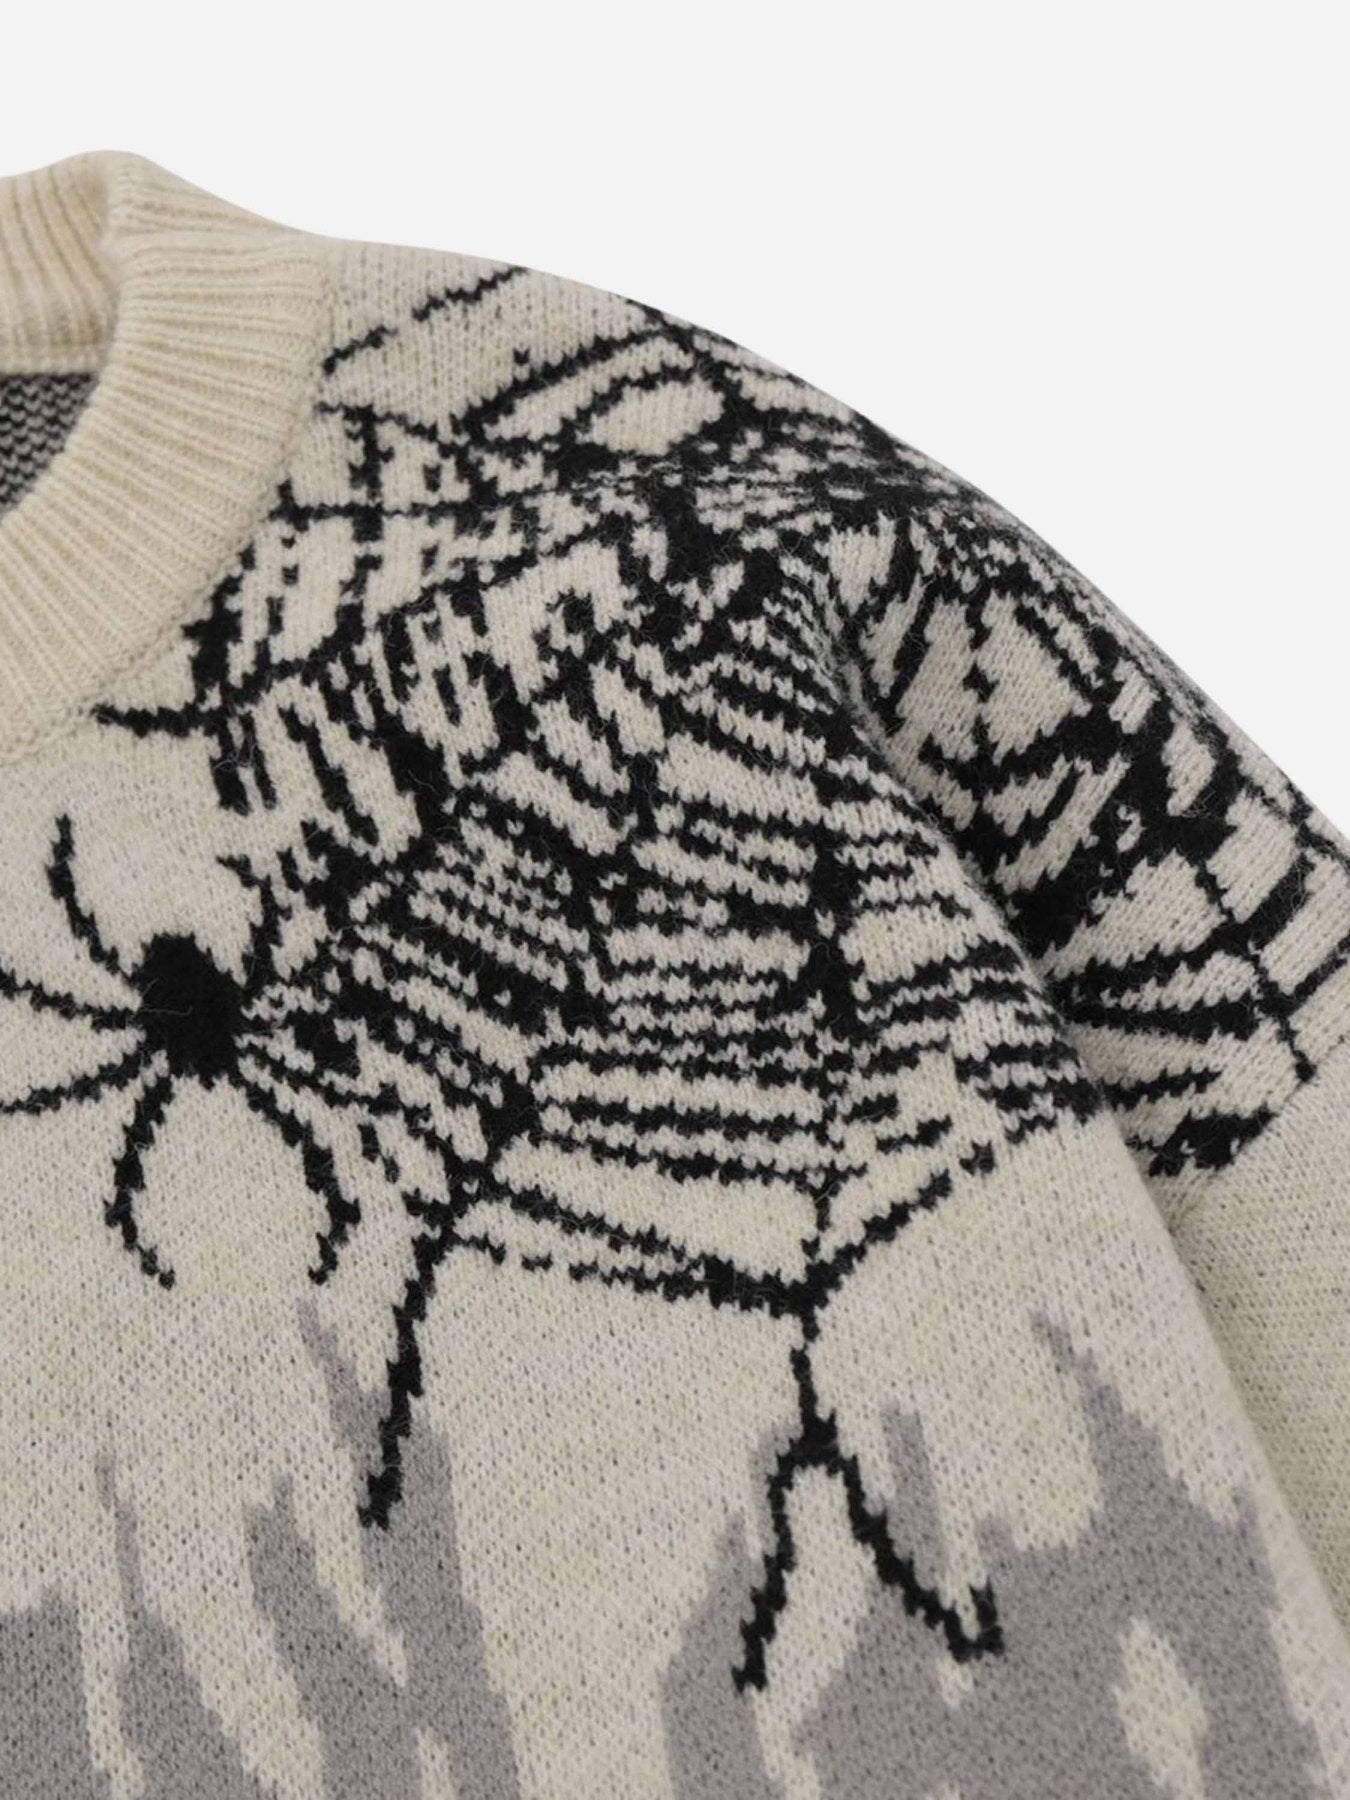 Thesupermade High Street Spider Web Jacquard Sweater - 1976